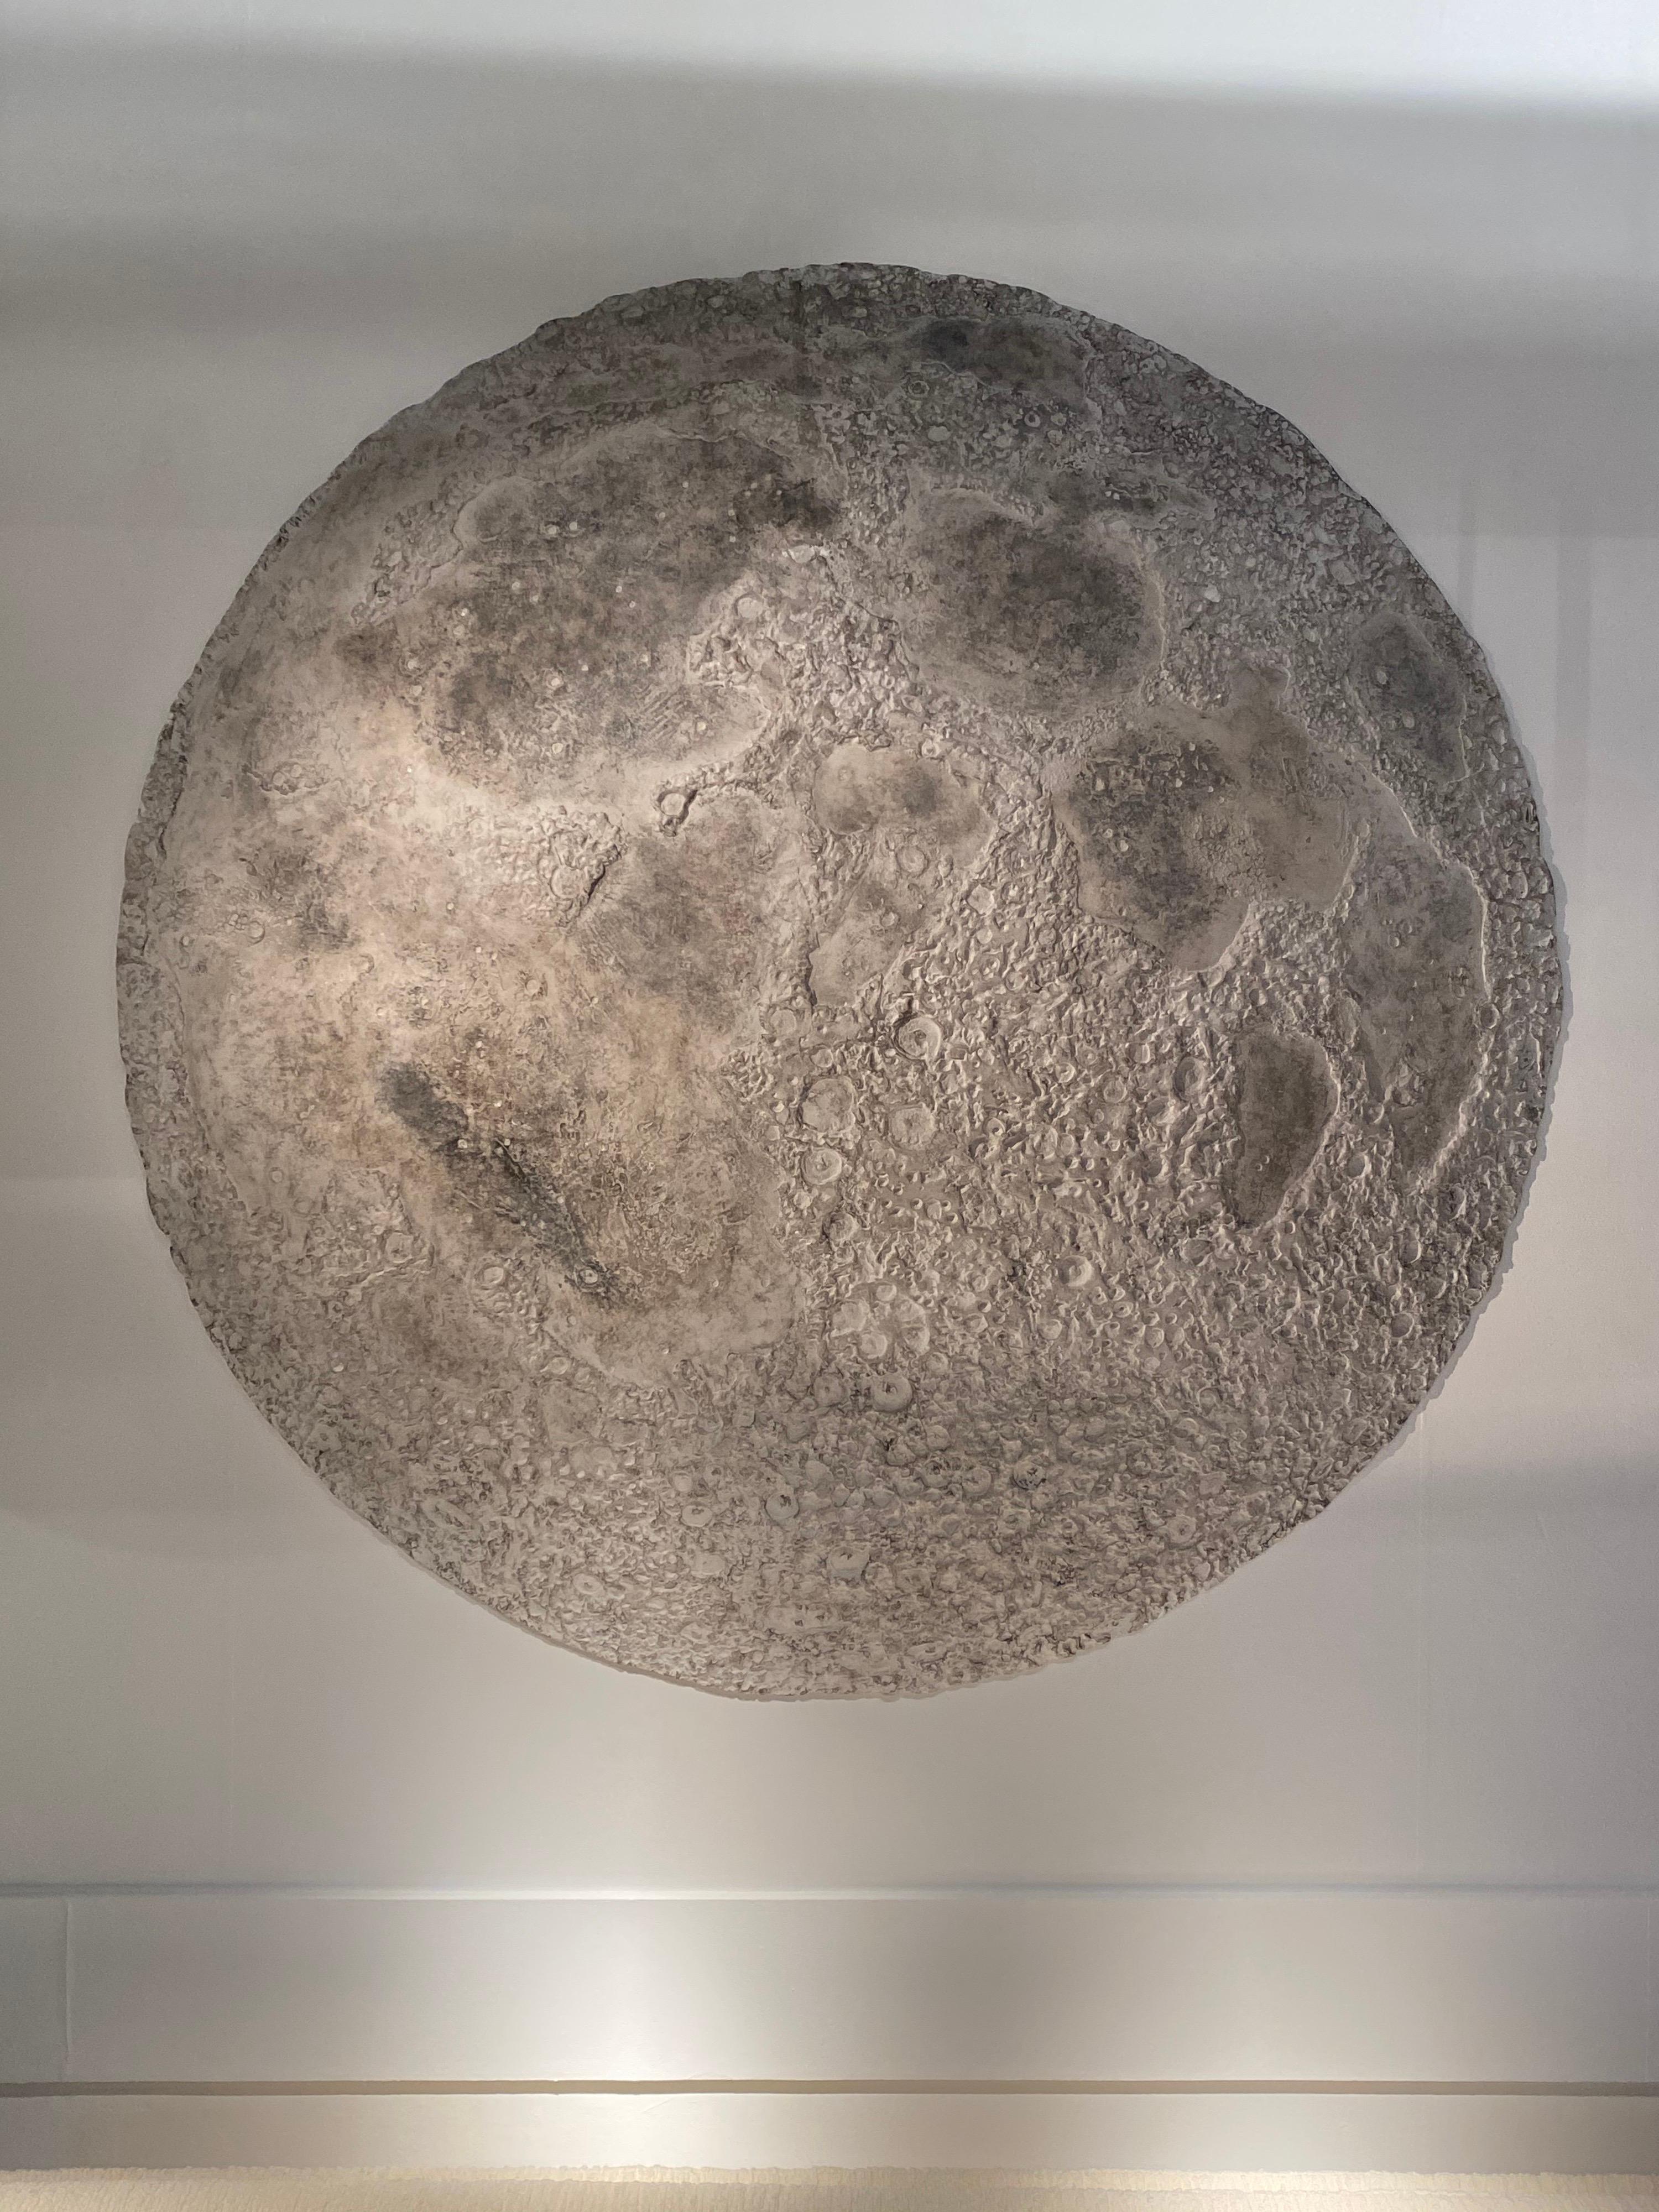 White Patina on resin moon wall-mounted sculpture by the French artist Michel Pichard
Edition 4/20
Measures: larger dimensions 150 cm diameter for 20 cm depth.